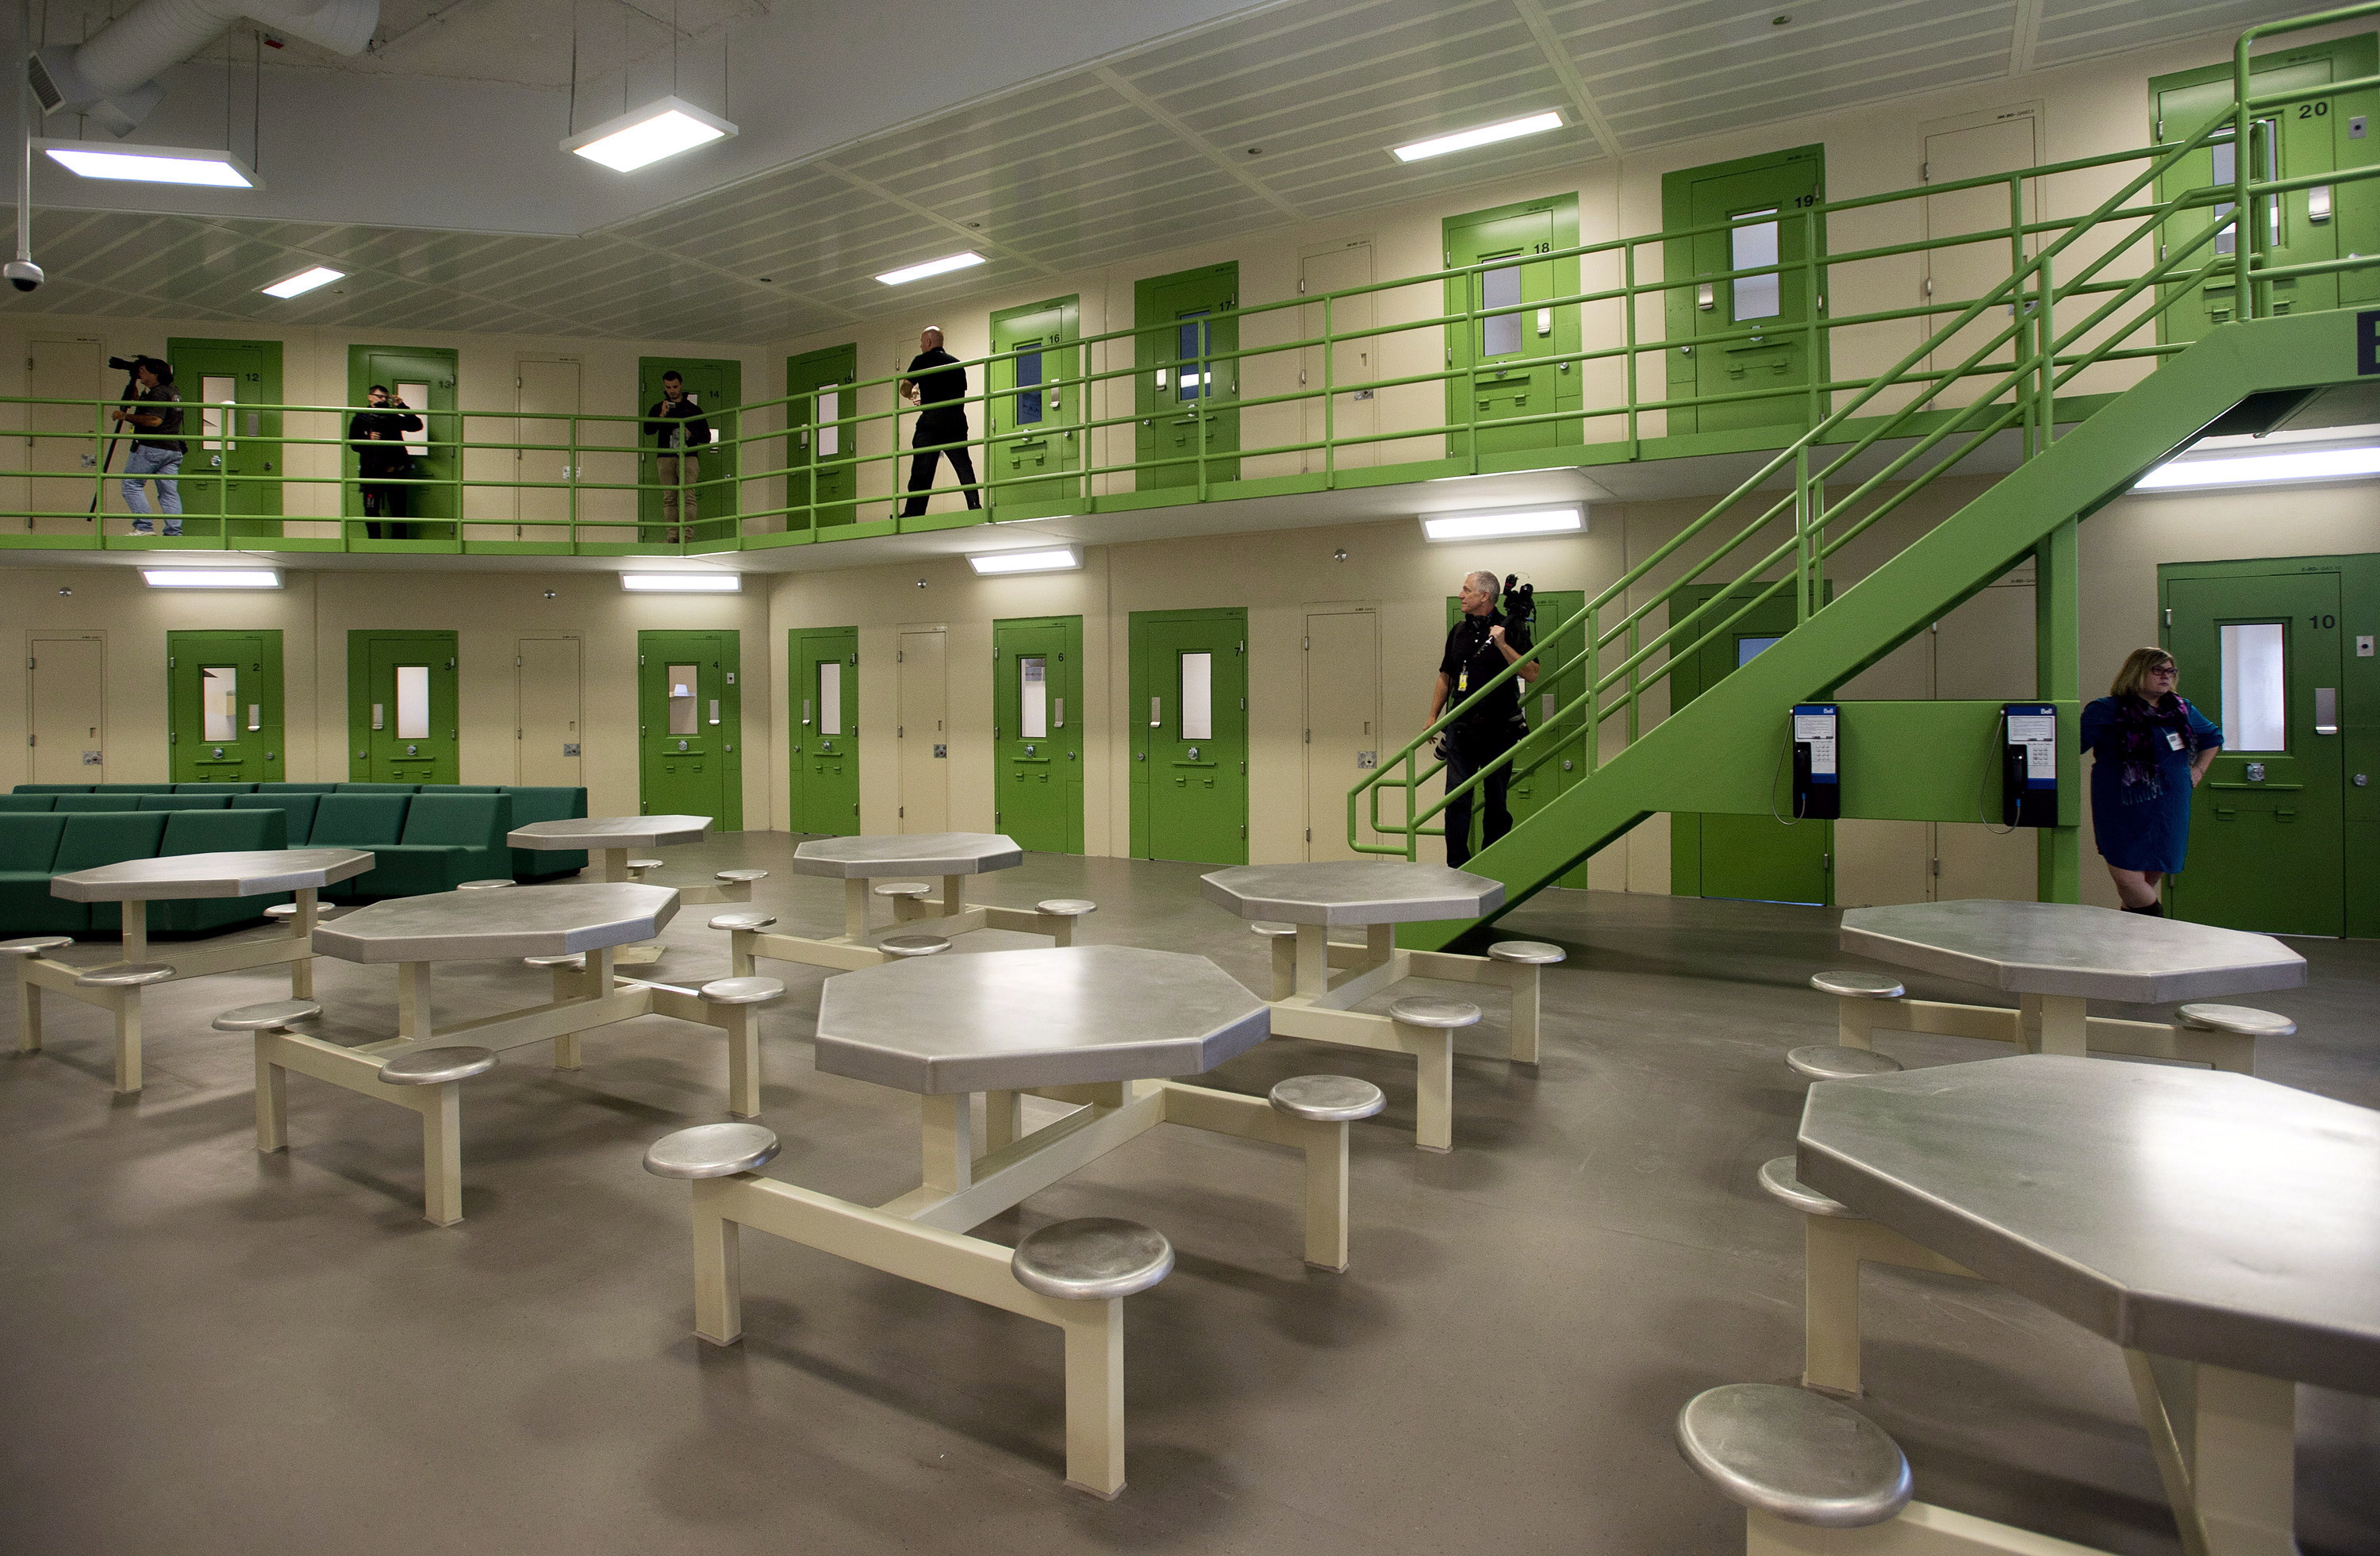 Ontario jail inmate numbers spike in last year, now well over capacity, data shows